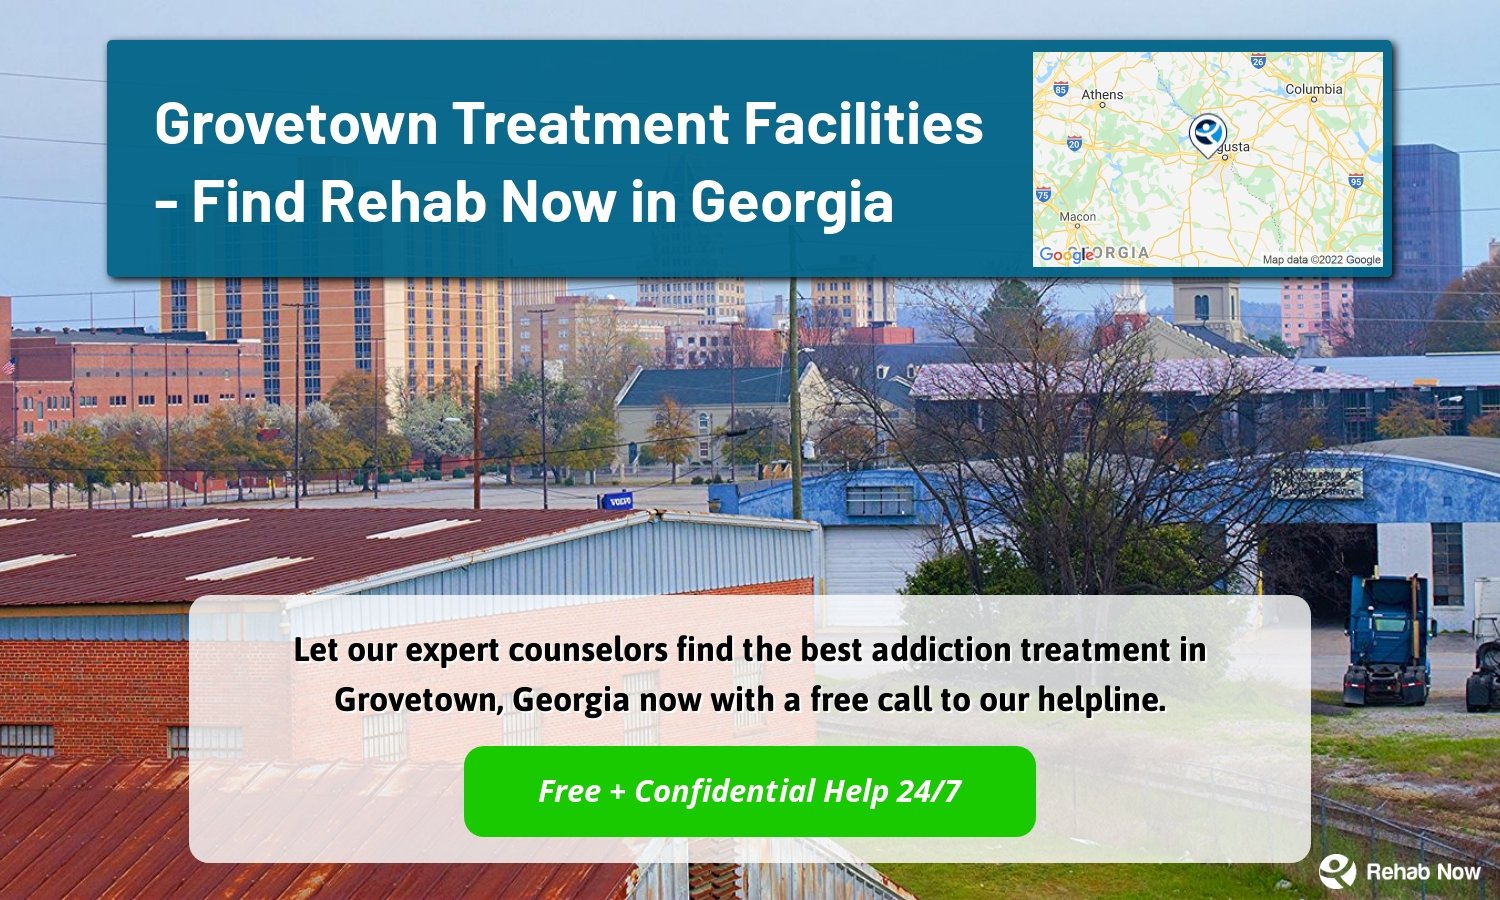 Let our expert counselors find the best addiction treatment in Grovetown, Georgia now with a free call to our helpline.